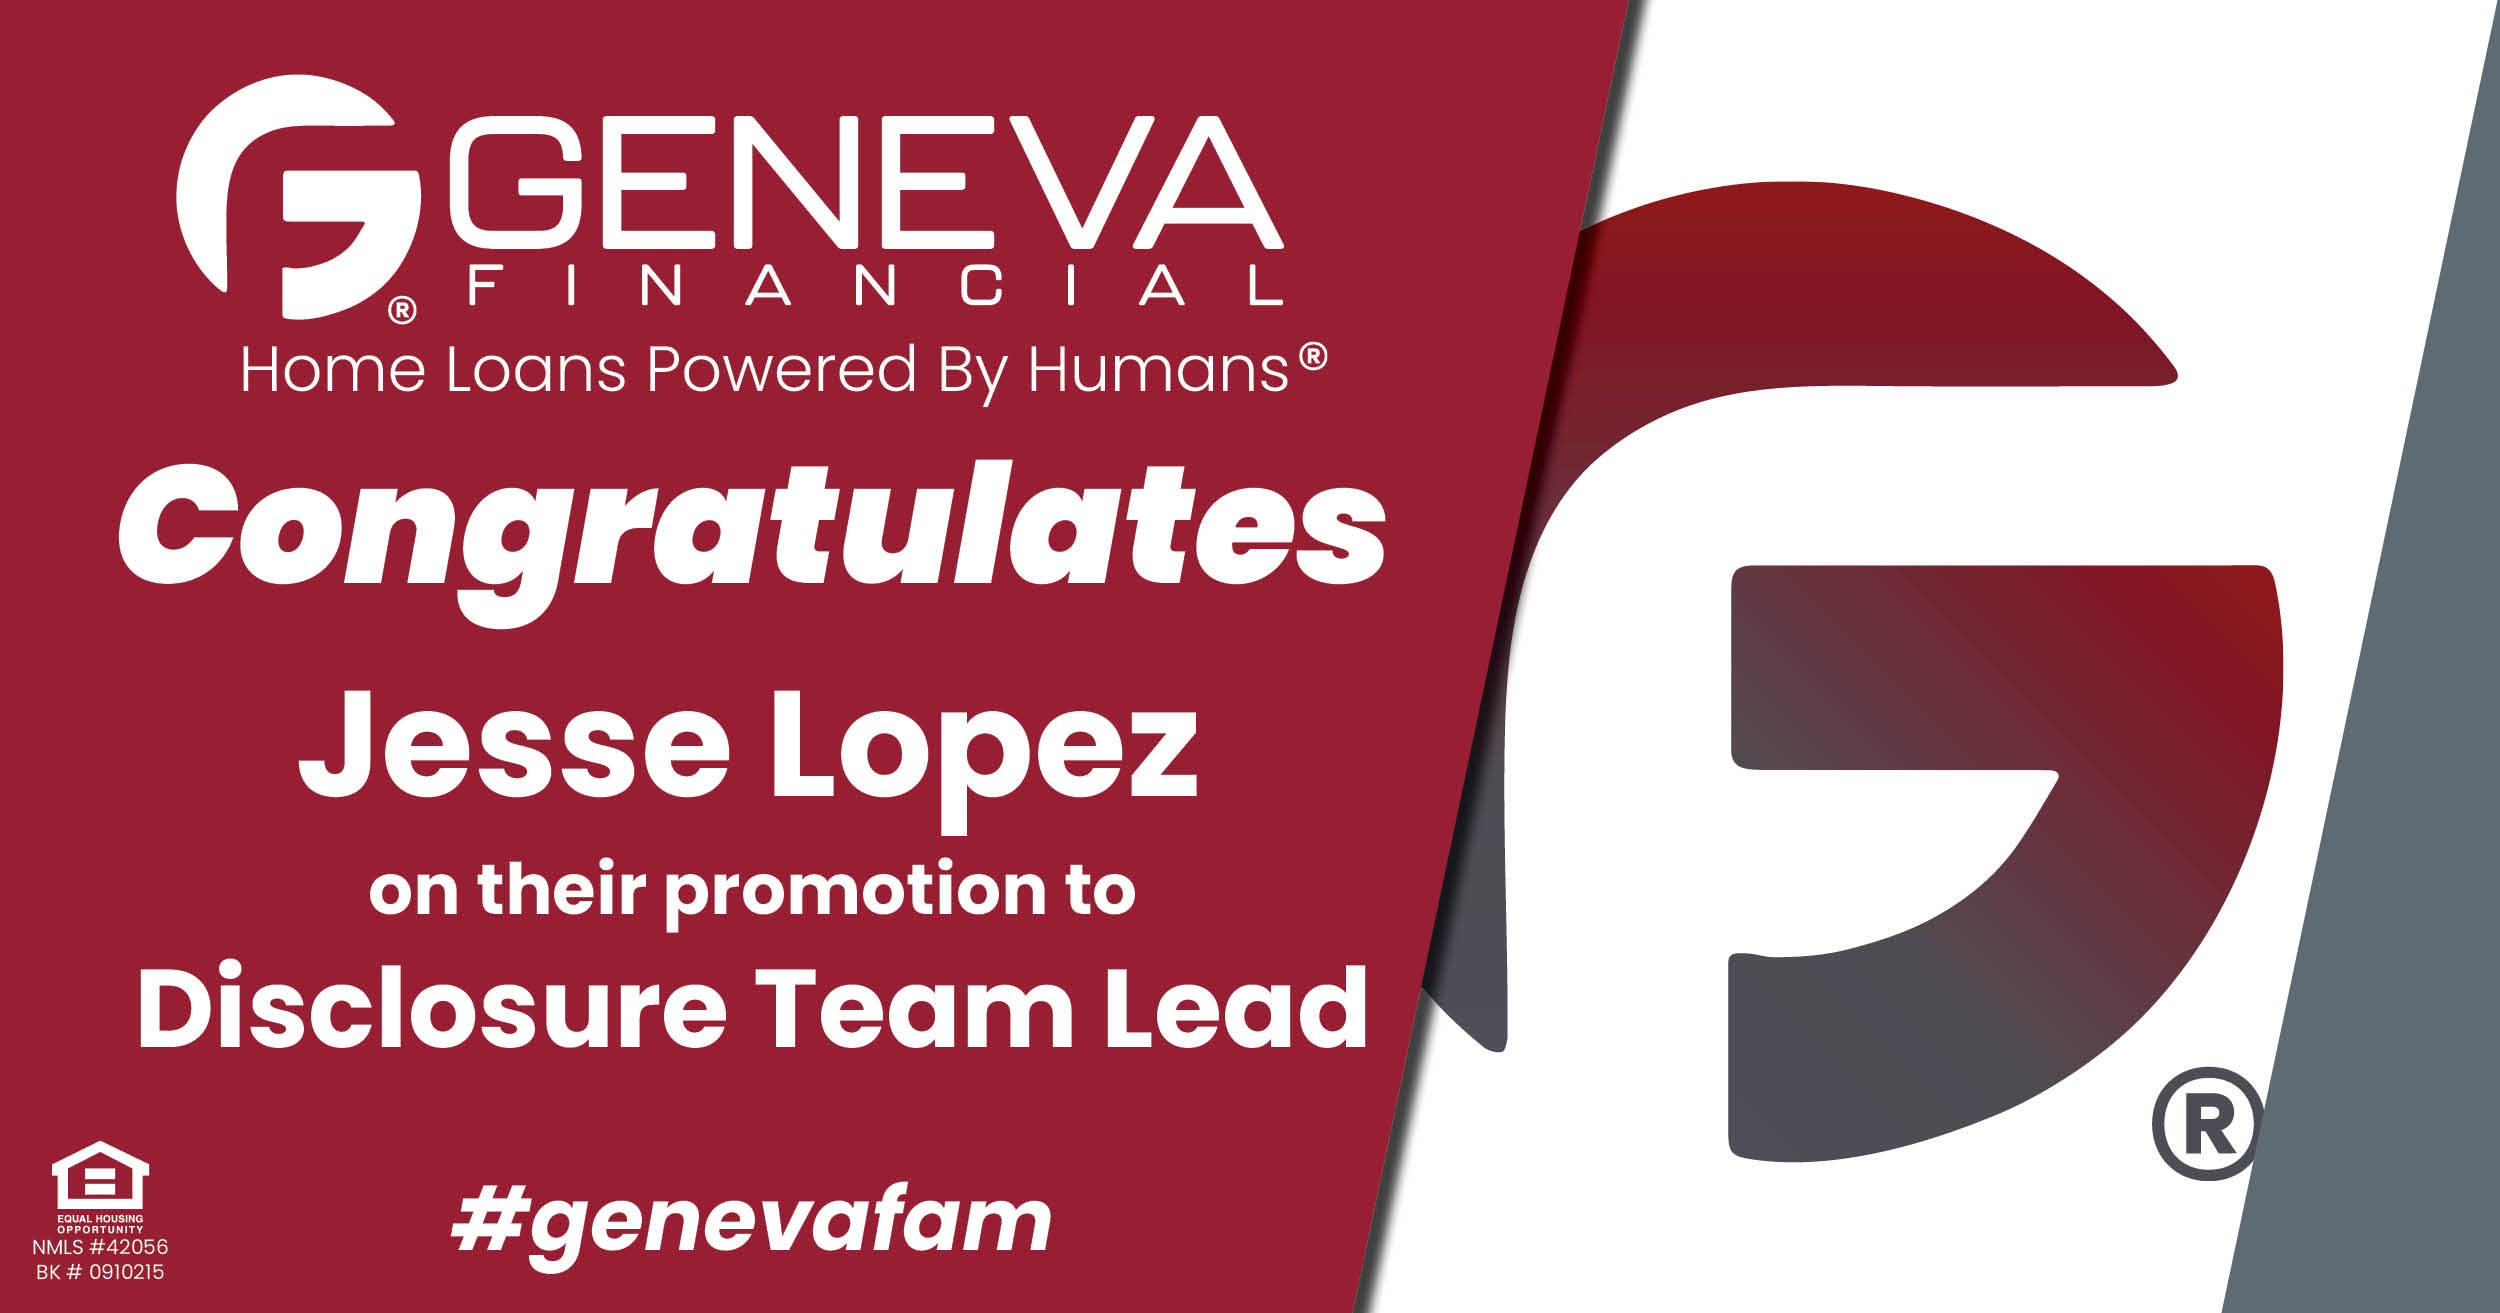 Geneva Financial Congratulates Jesse Lopez for Promotion to Disclosure Team Lead, continuing the outstanding service that Geneva strives for!